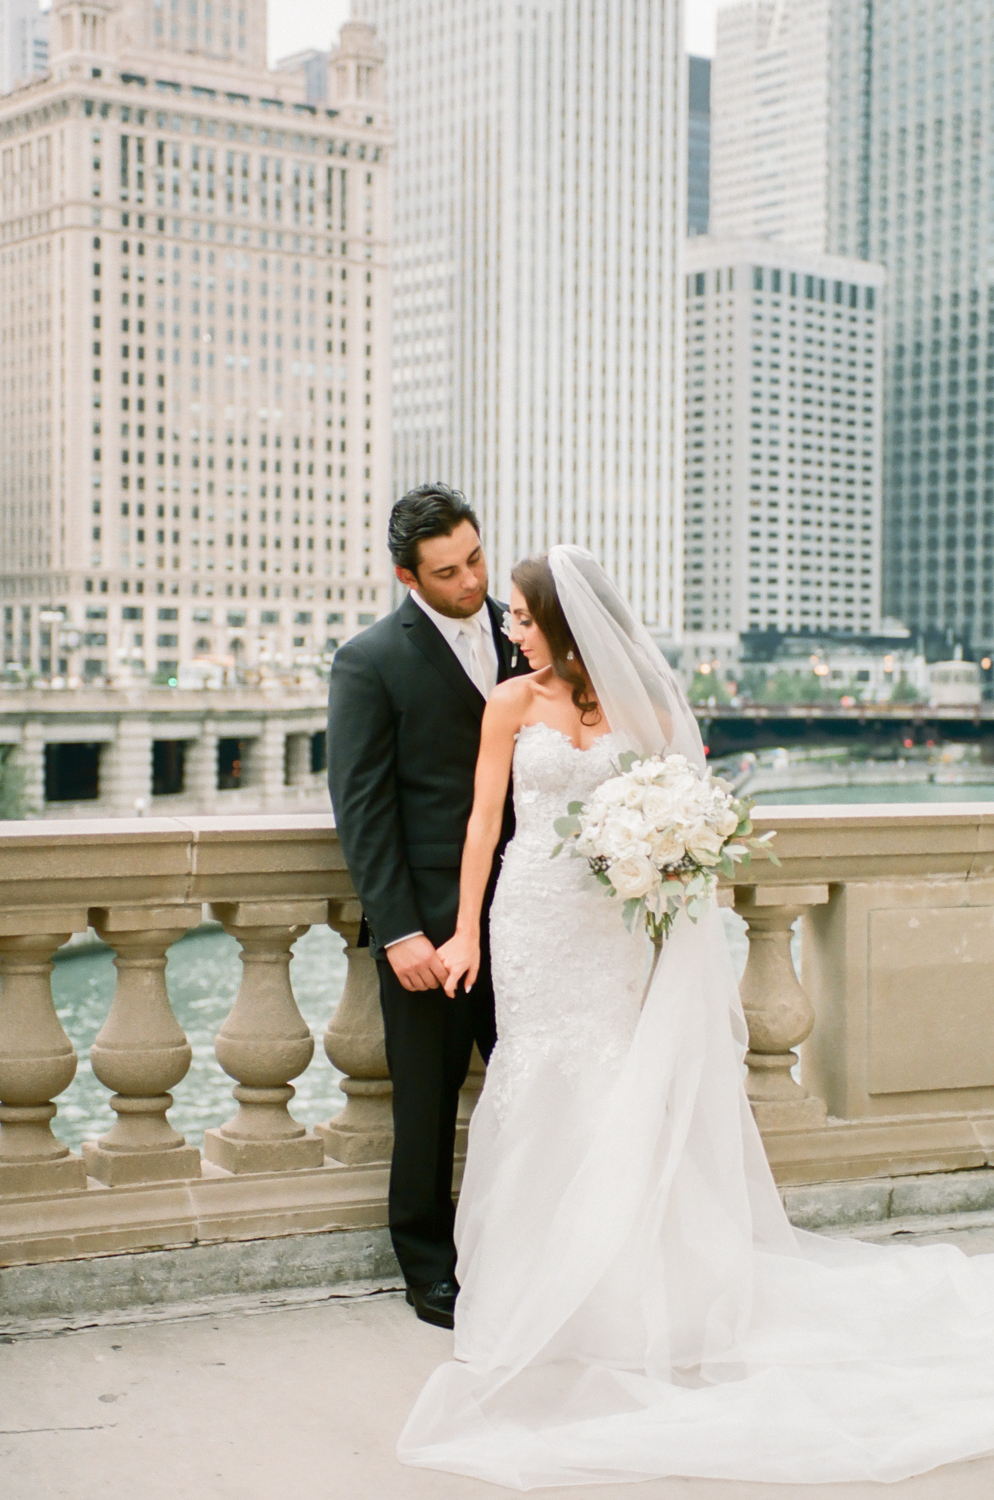 Bride and groom by Chicago canal on Michigan Avenue, Destination fine art wedding photographer